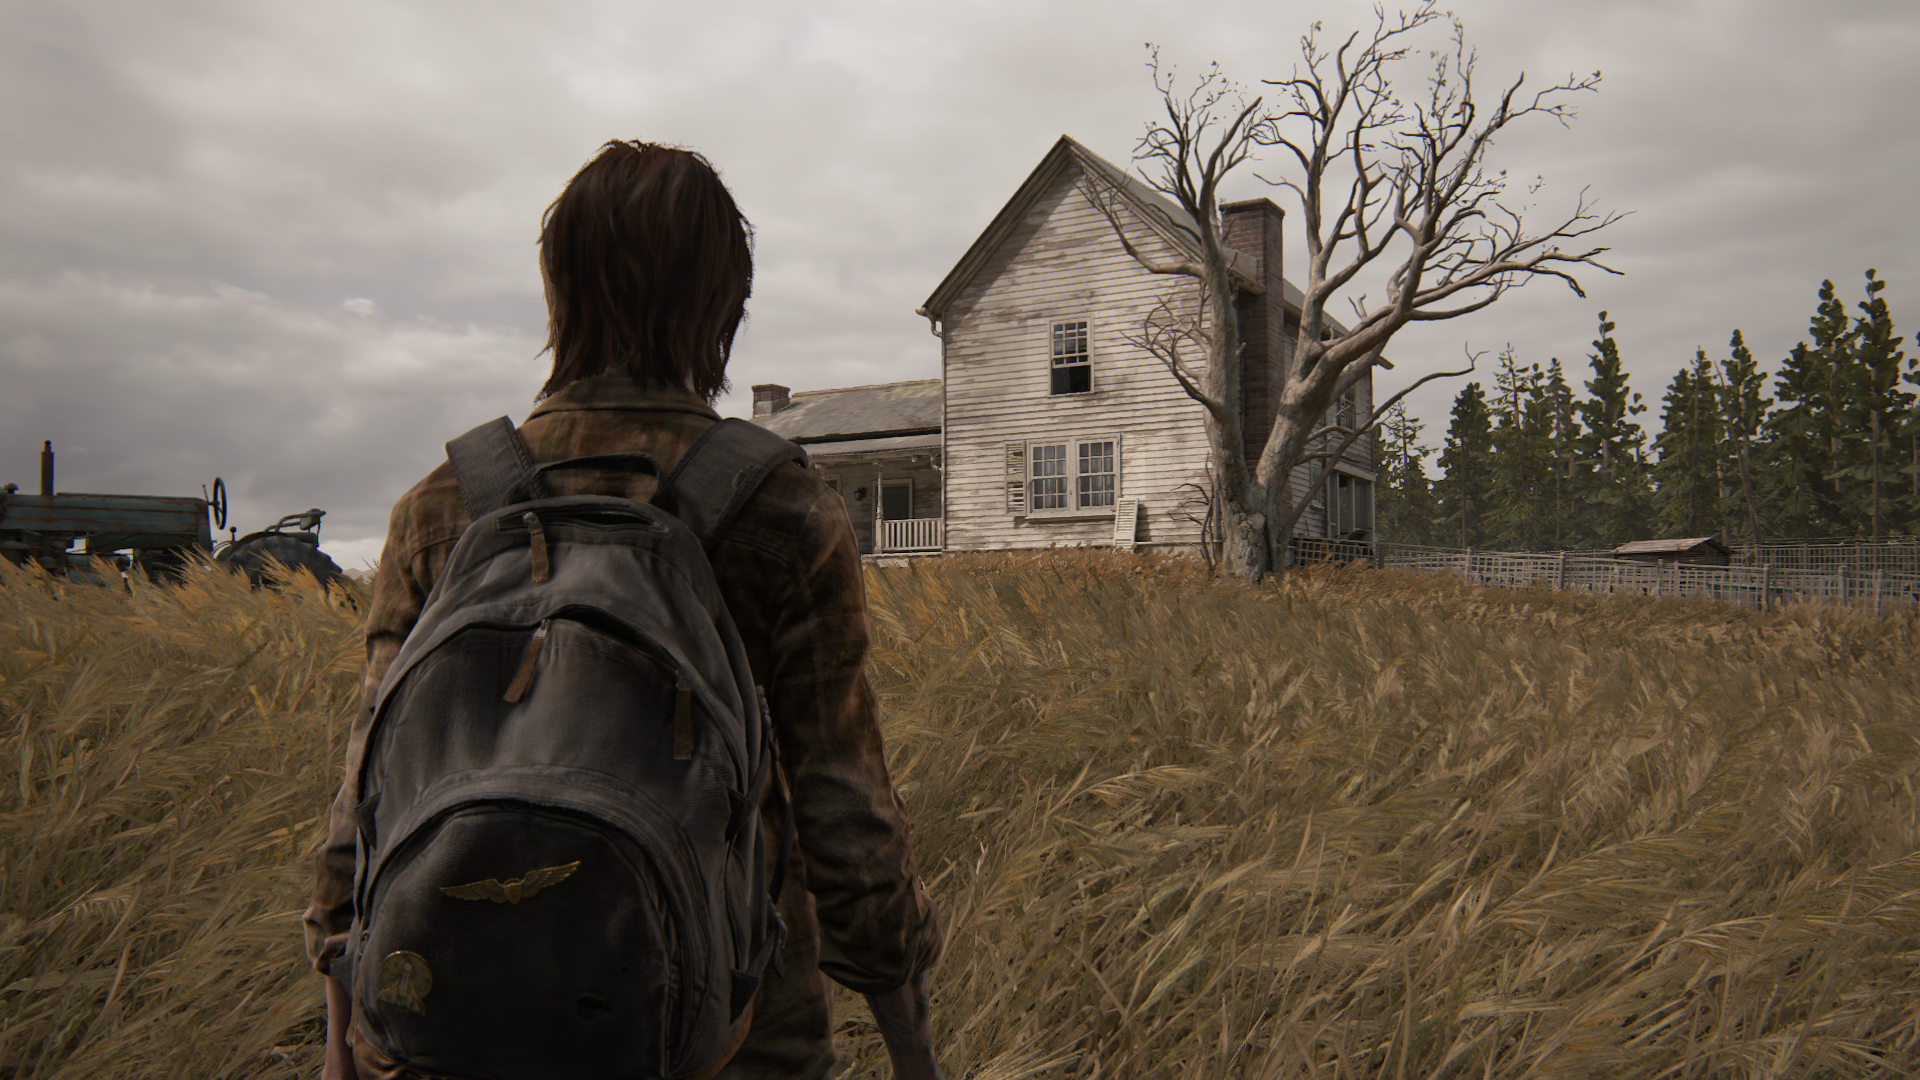 Wallpaper : The Last of Us, video games, PlayStation 1920x1080